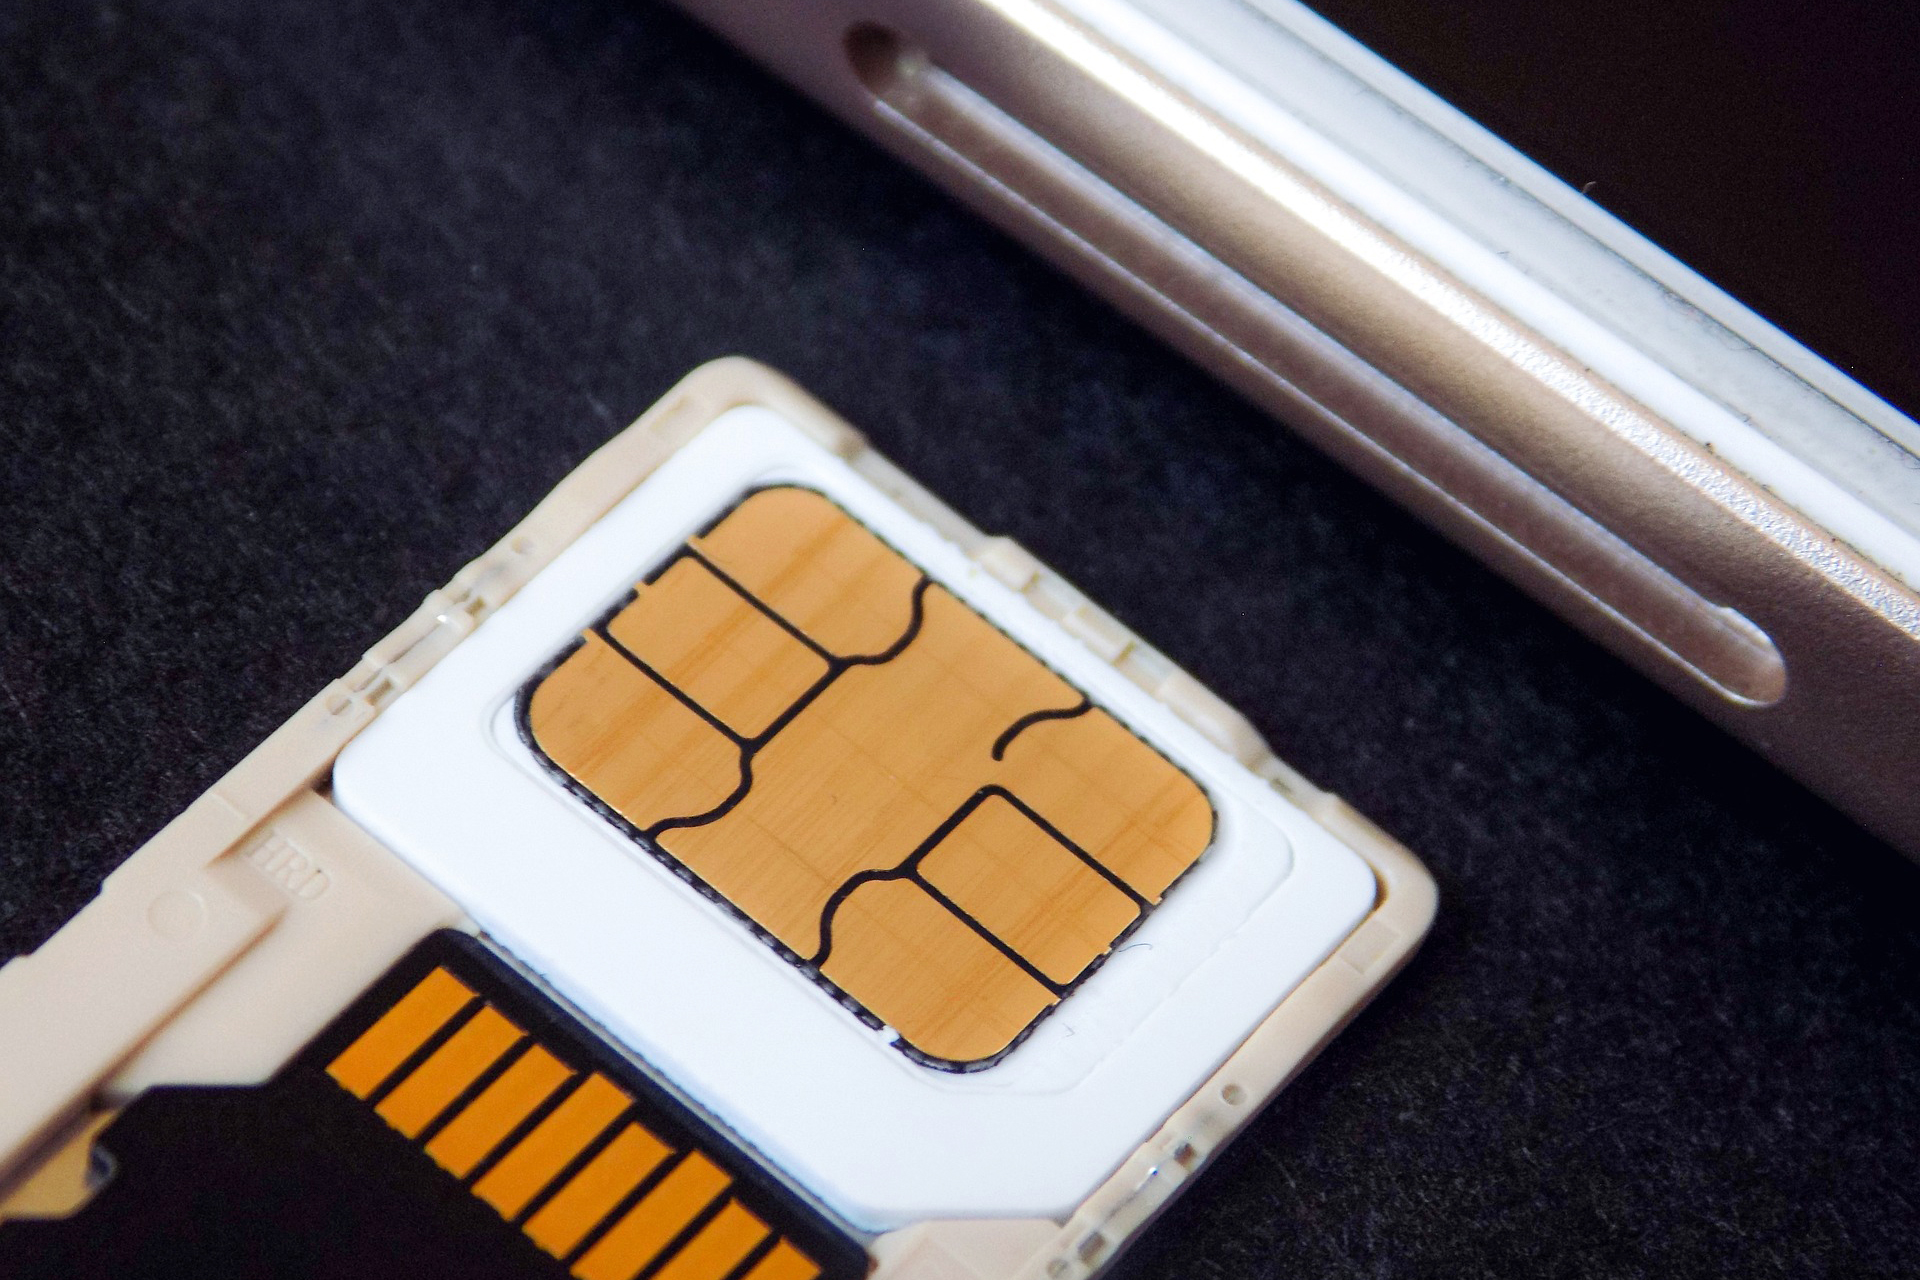 SIM card next to the SIM card slot for a mobile phone